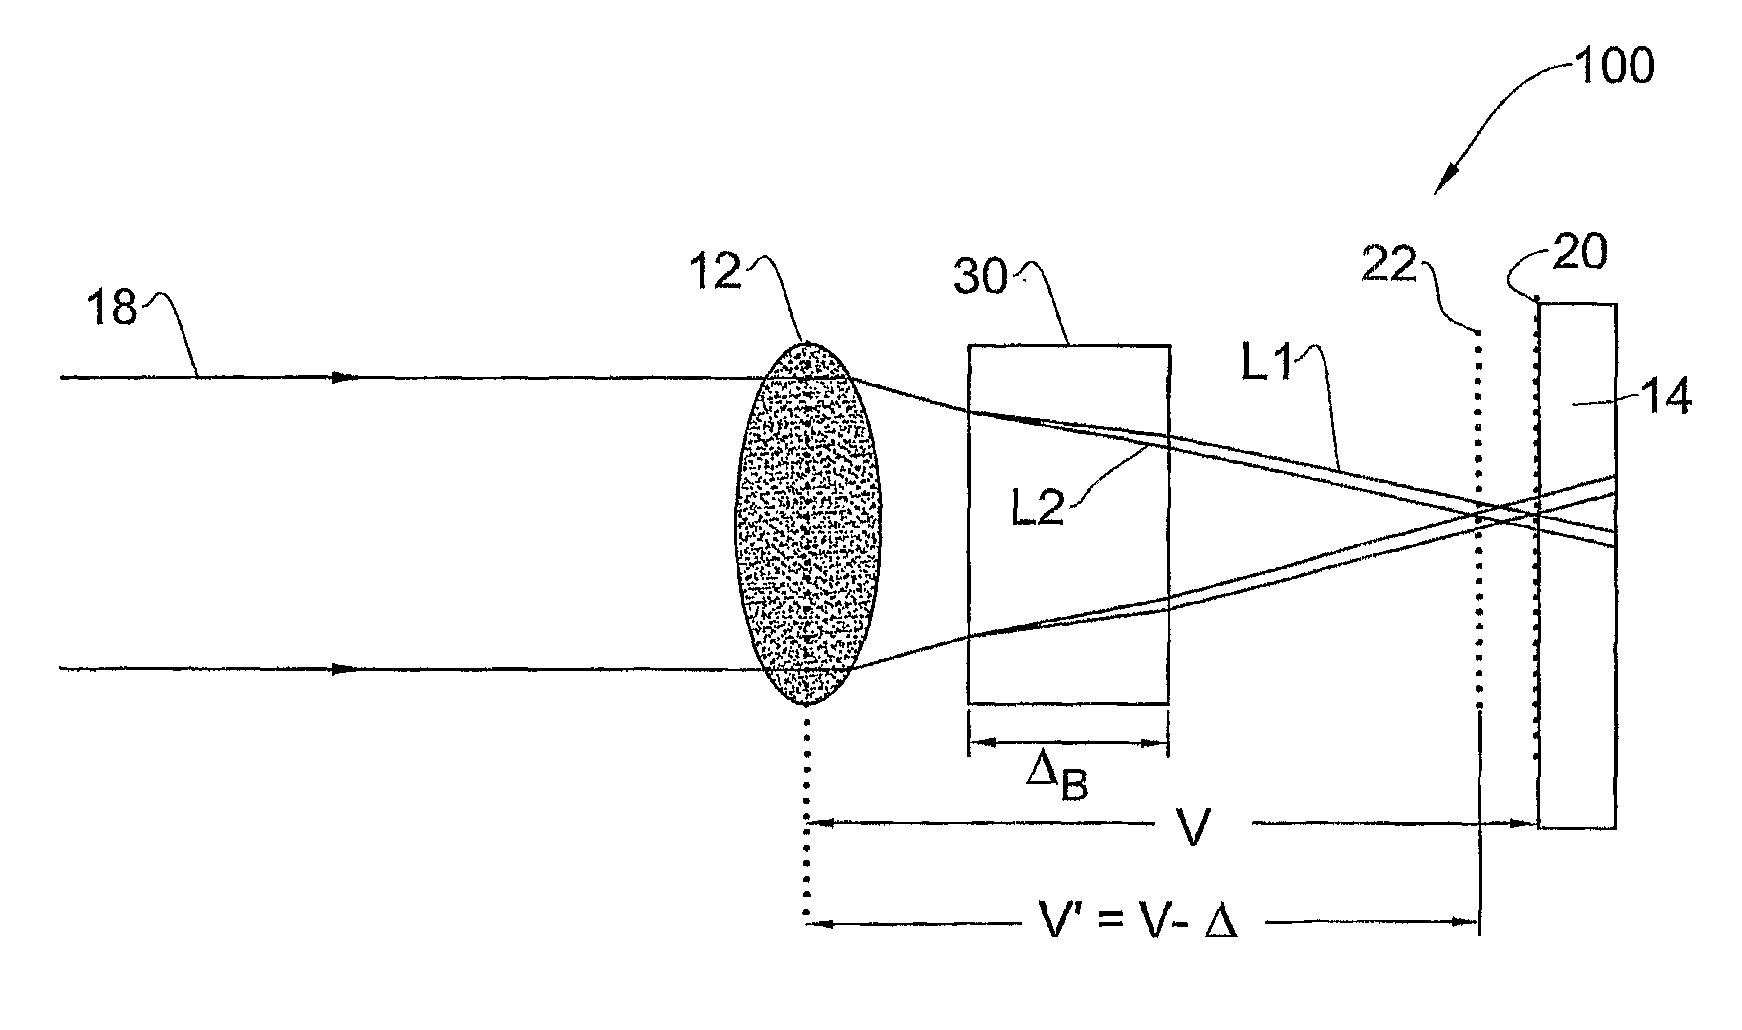 All Optical System and Method for Providing Extended Depth of Focus of Imaging